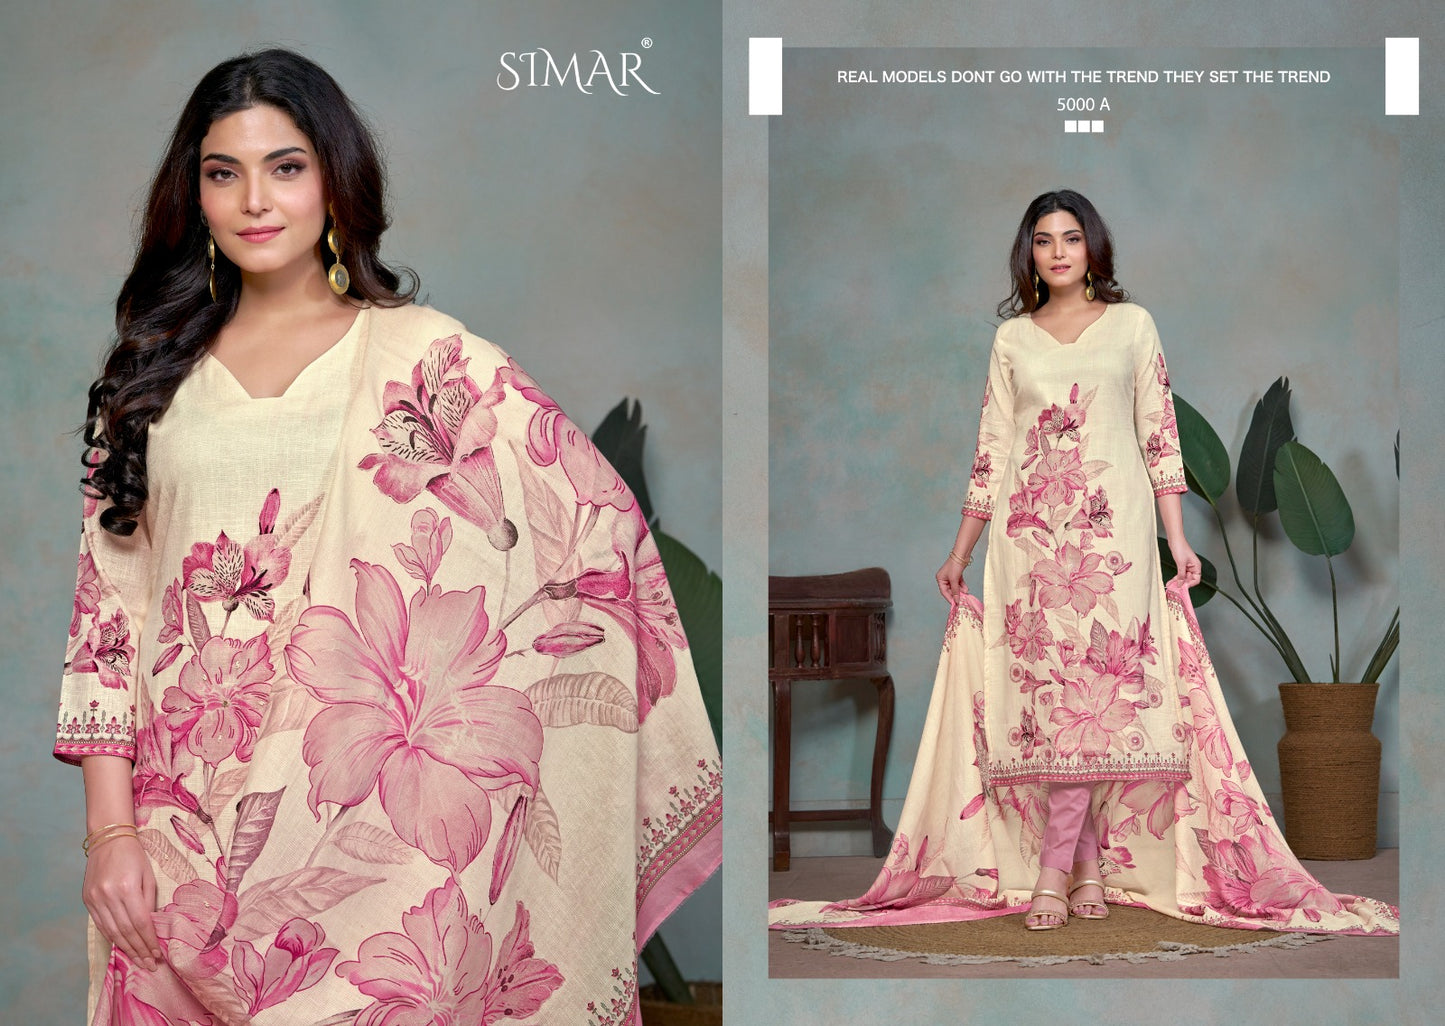 Didaar Simar Pure Linen Pant Style Suits Wholesale Price